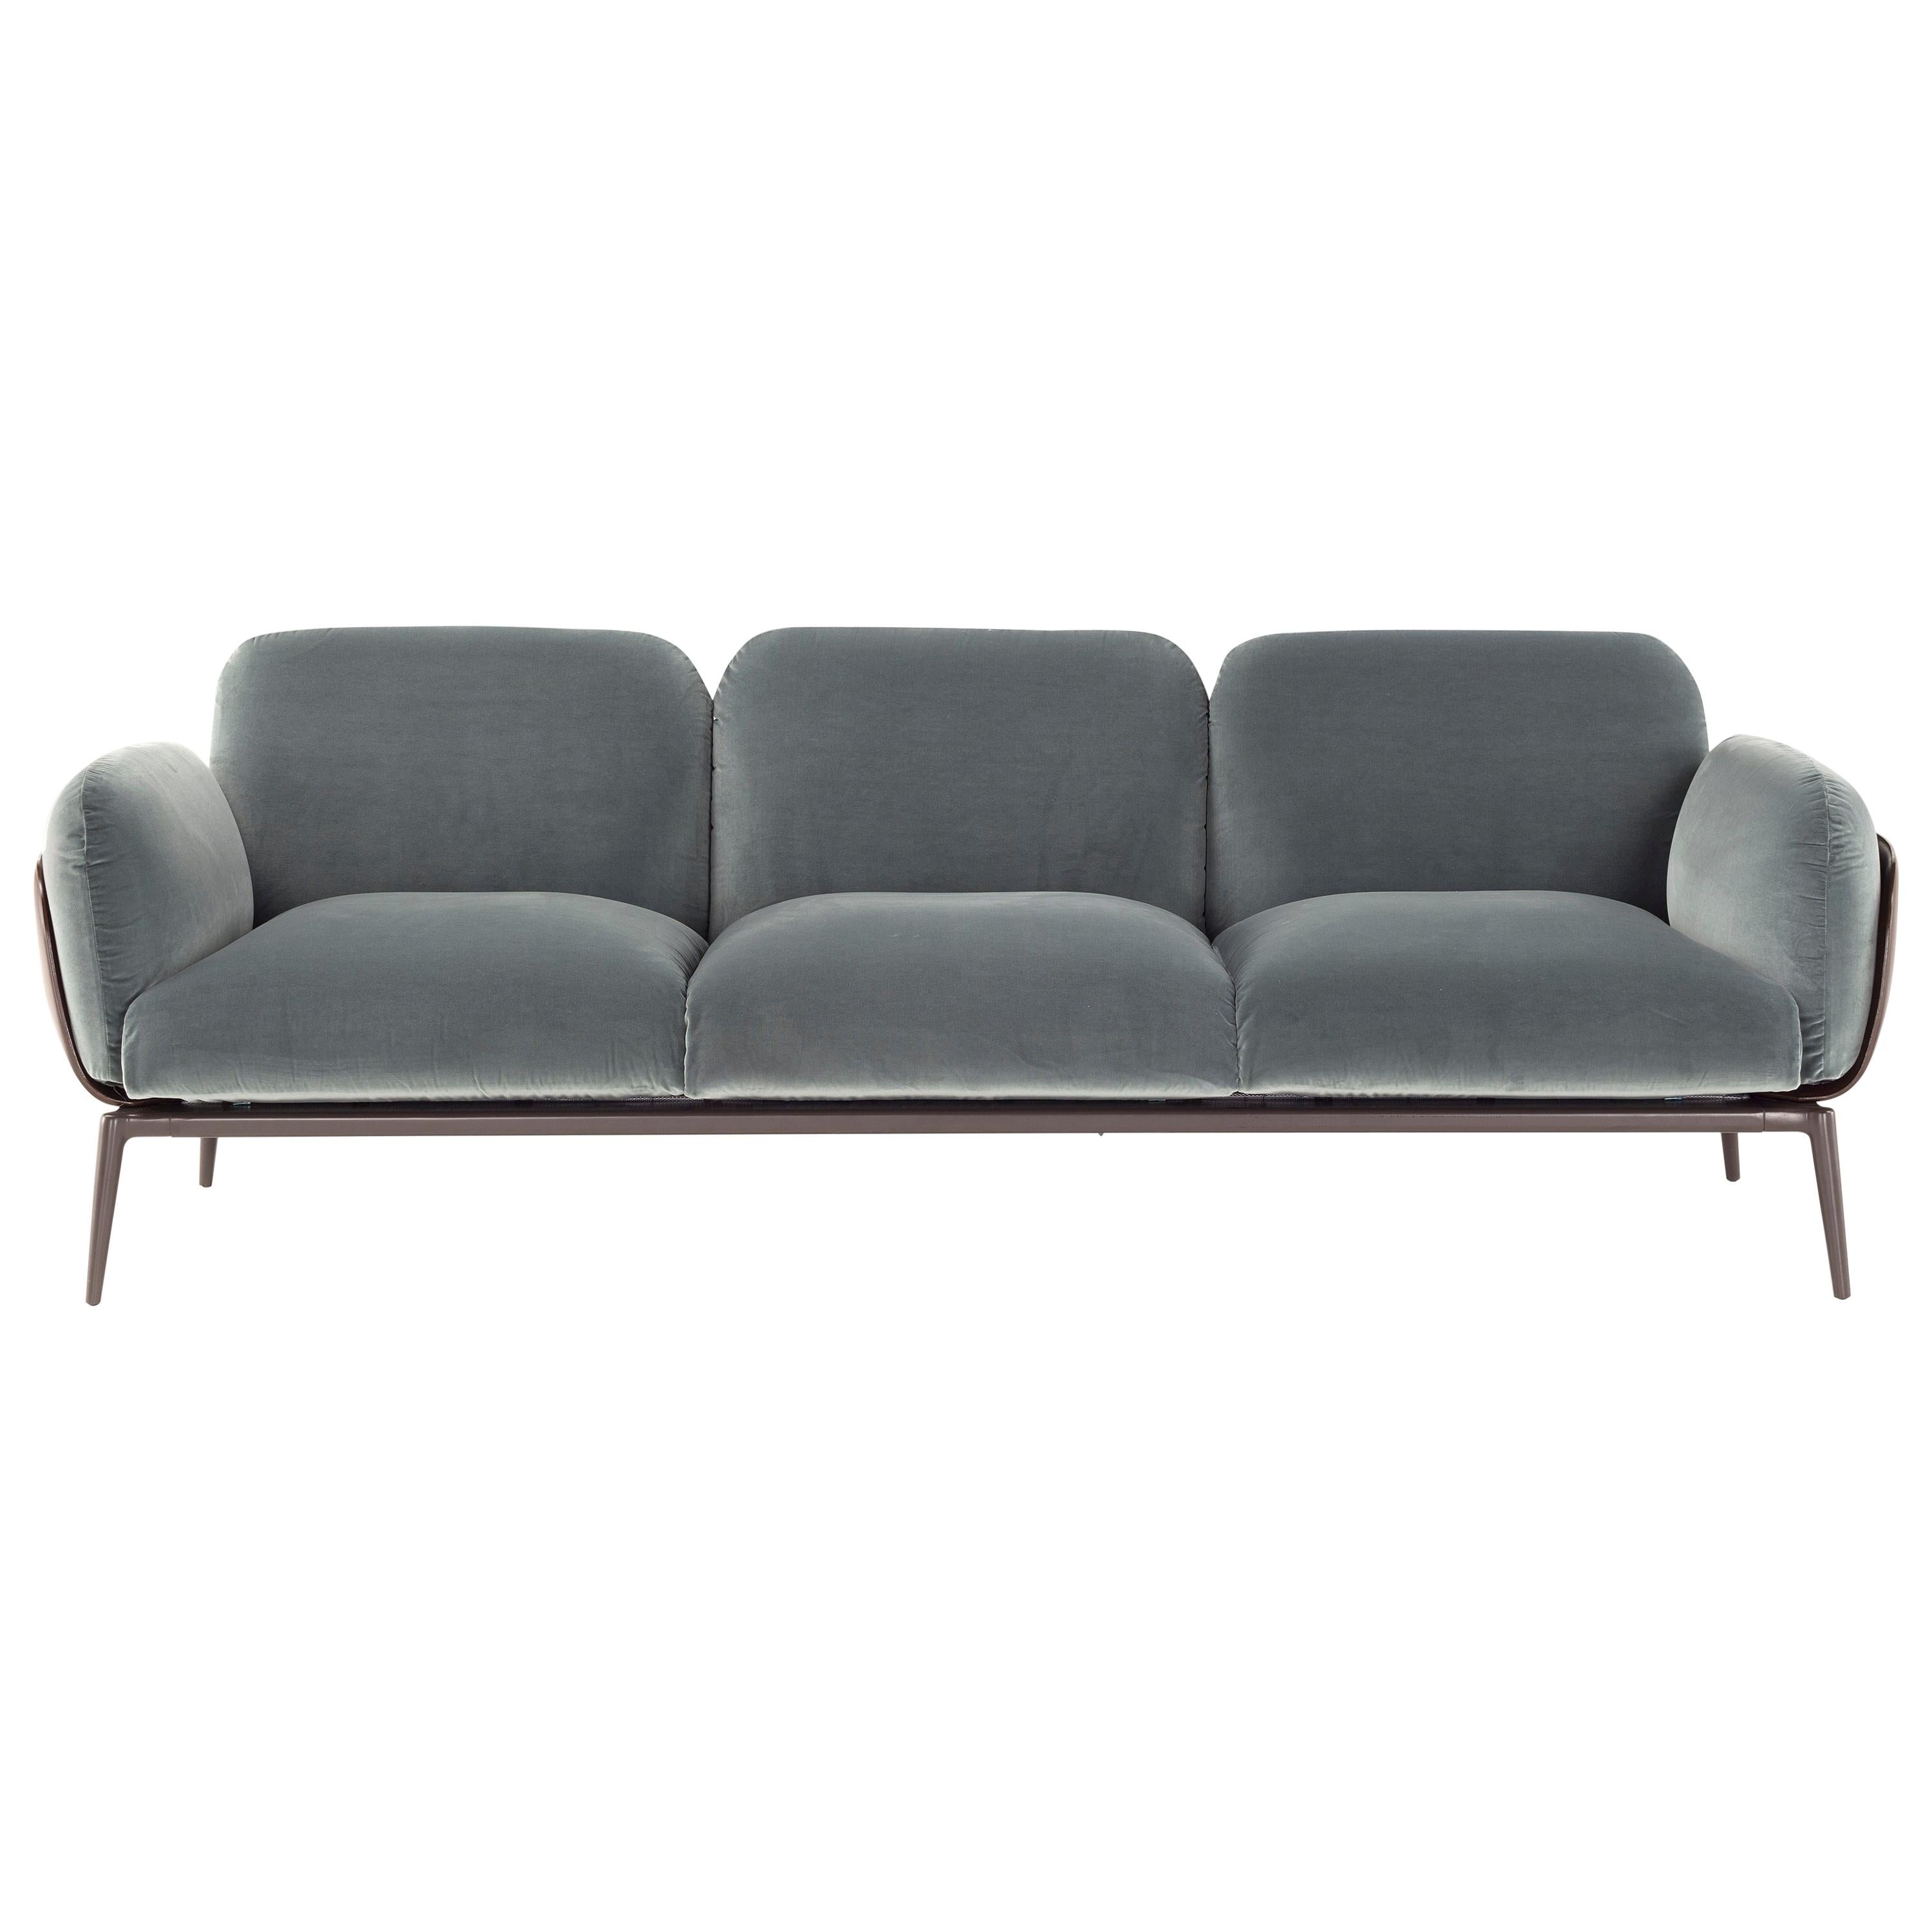 Amura 'Brooklyn' Sofa in Blue Velvet and Brown Cuoio Leather by Stefano Bigi For Sale